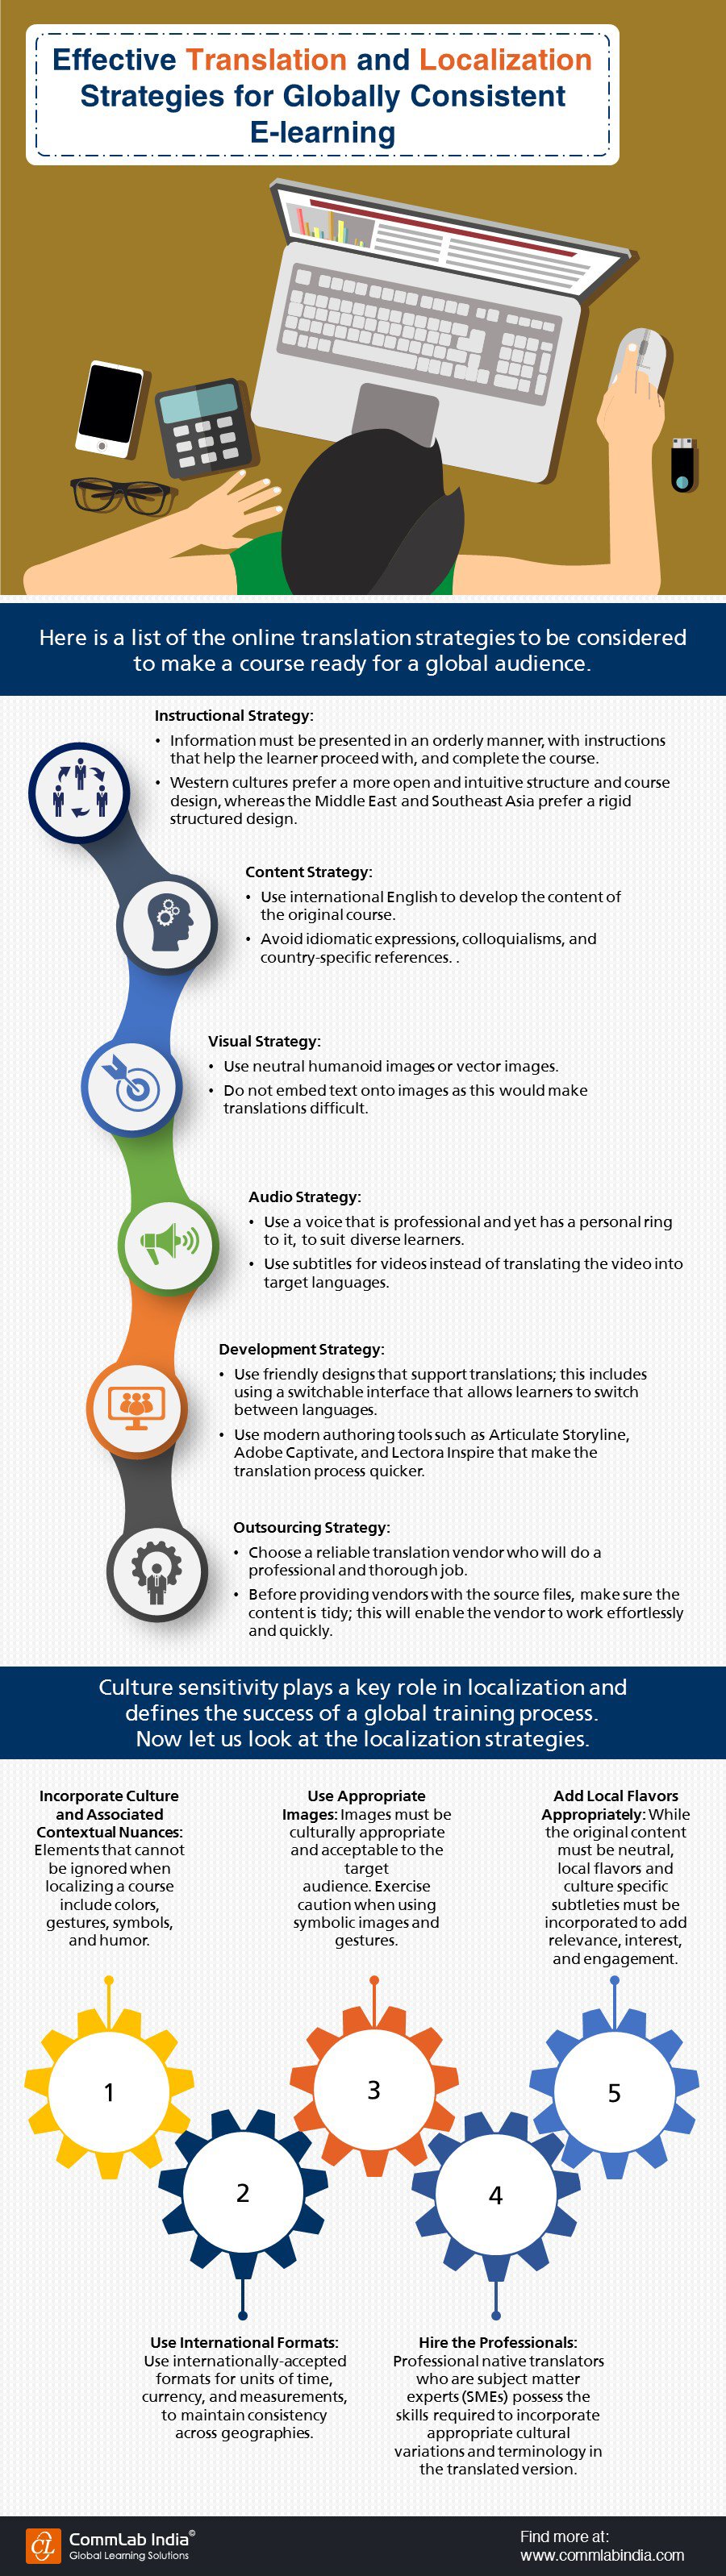 Effective Translation and Localization Strategies for Globally Consistent E-learning [Infographic]